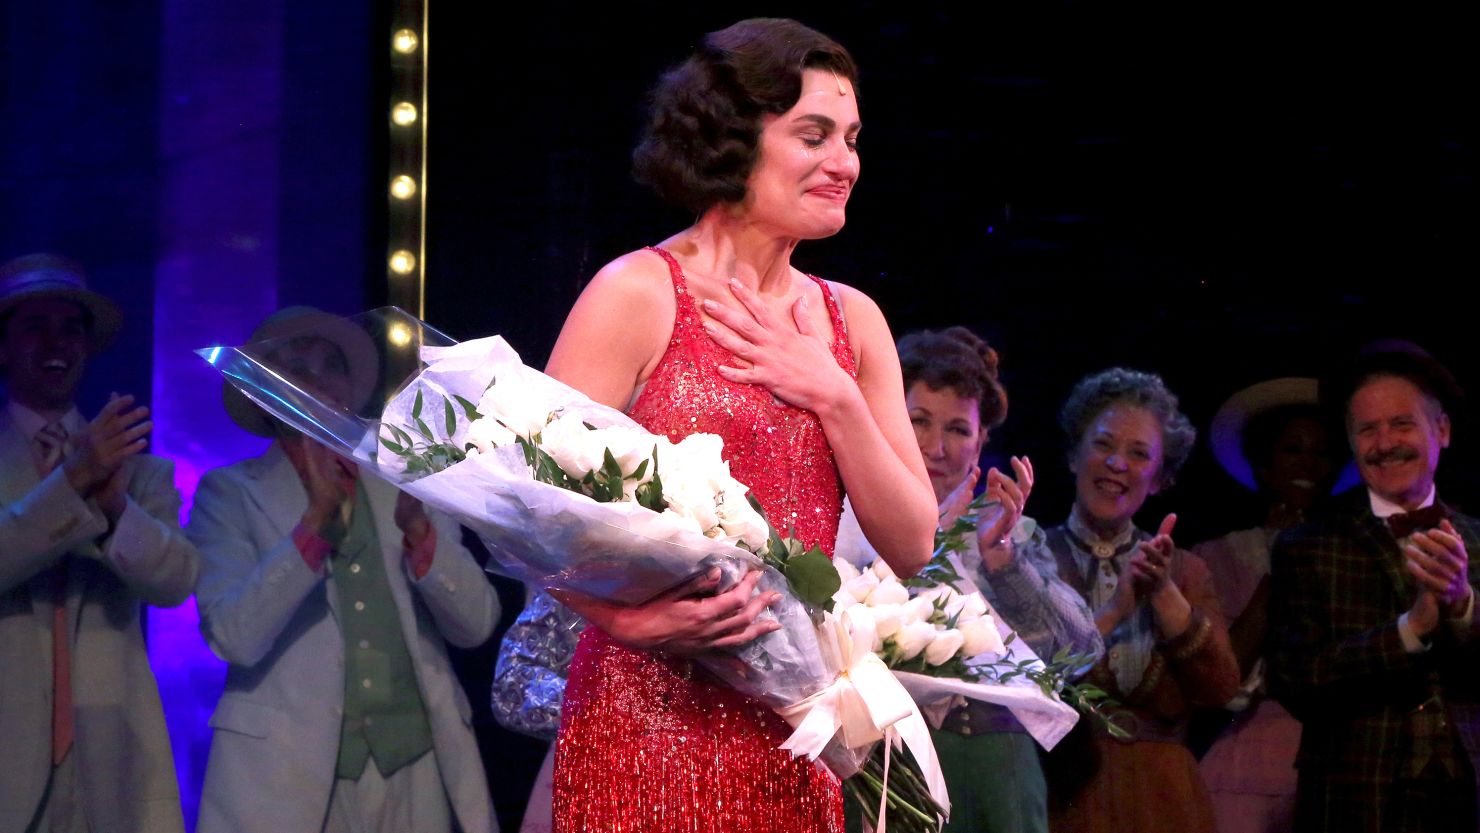 Lea Michele takes her first curtain call as "Fanny Brice" in "Funny Girl" on Broadway at The August Wilson Theatre on September 6.